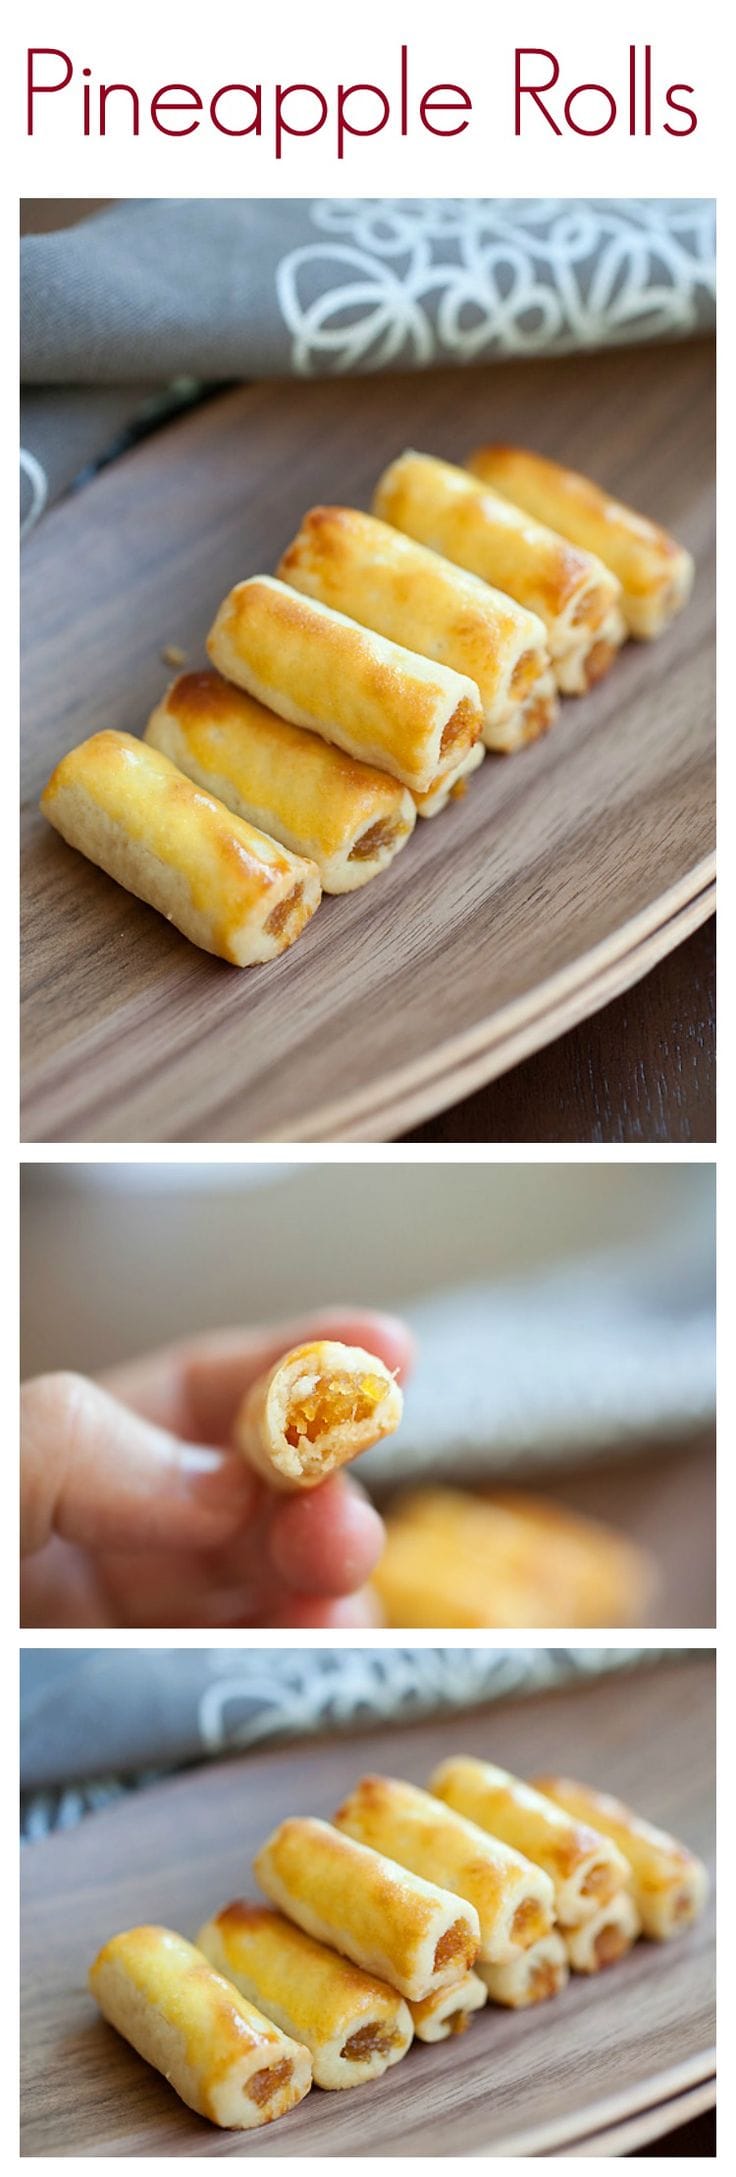 Pineapple Rolls - amazing pastry filled with pineapple jam, a must-have for Lunar New Year in Southeast Asia | rasamalaysia.com